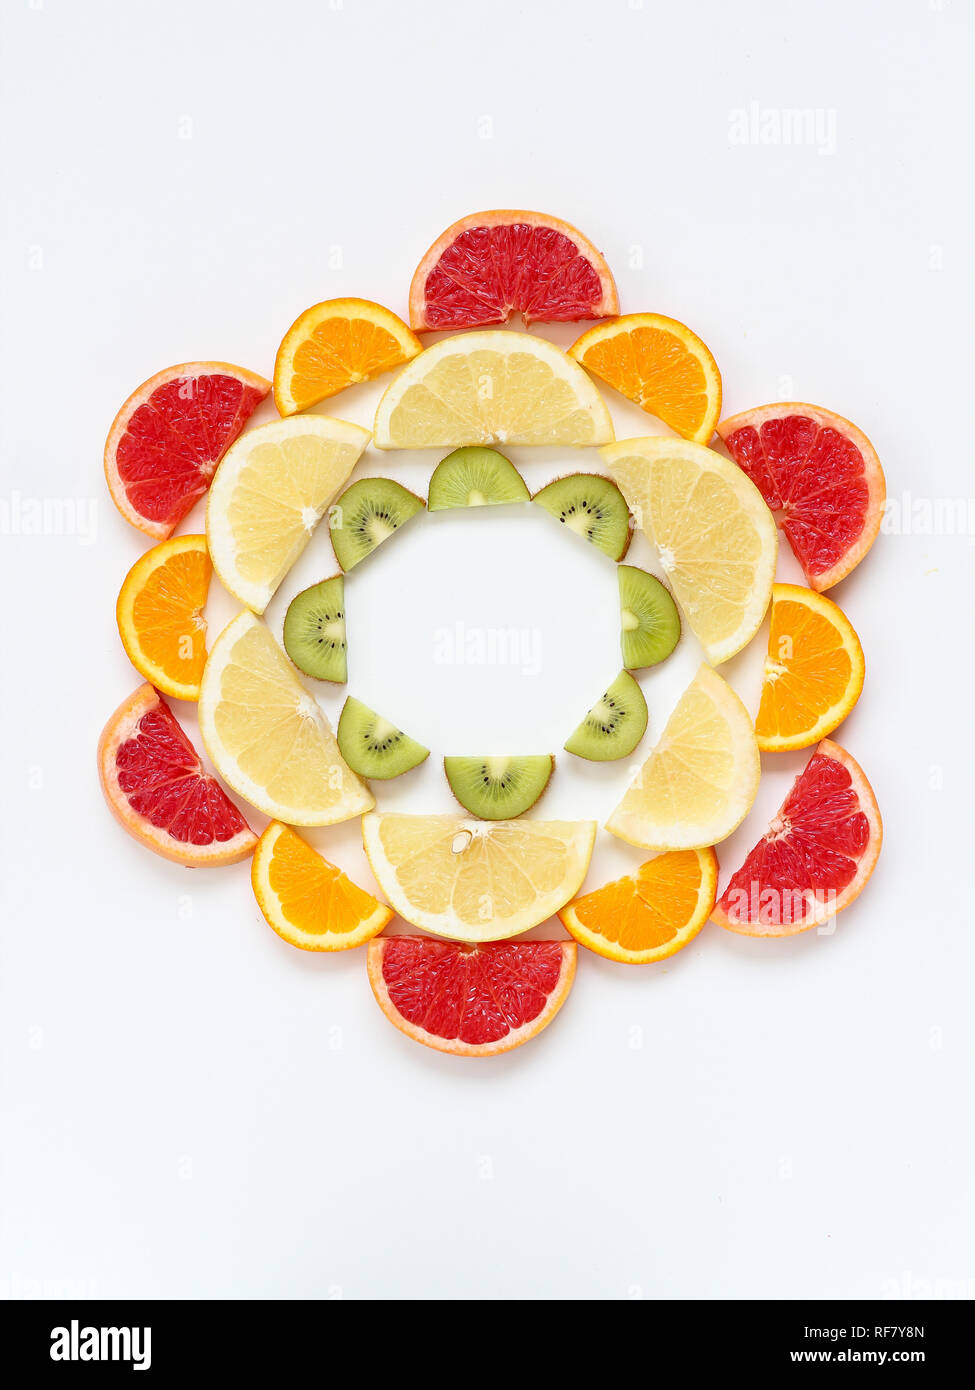 Creative pattern of sliced fruits - kiwi, orange and grapefruits - arranged in a circle. Flat lay with copy space Stock Photo